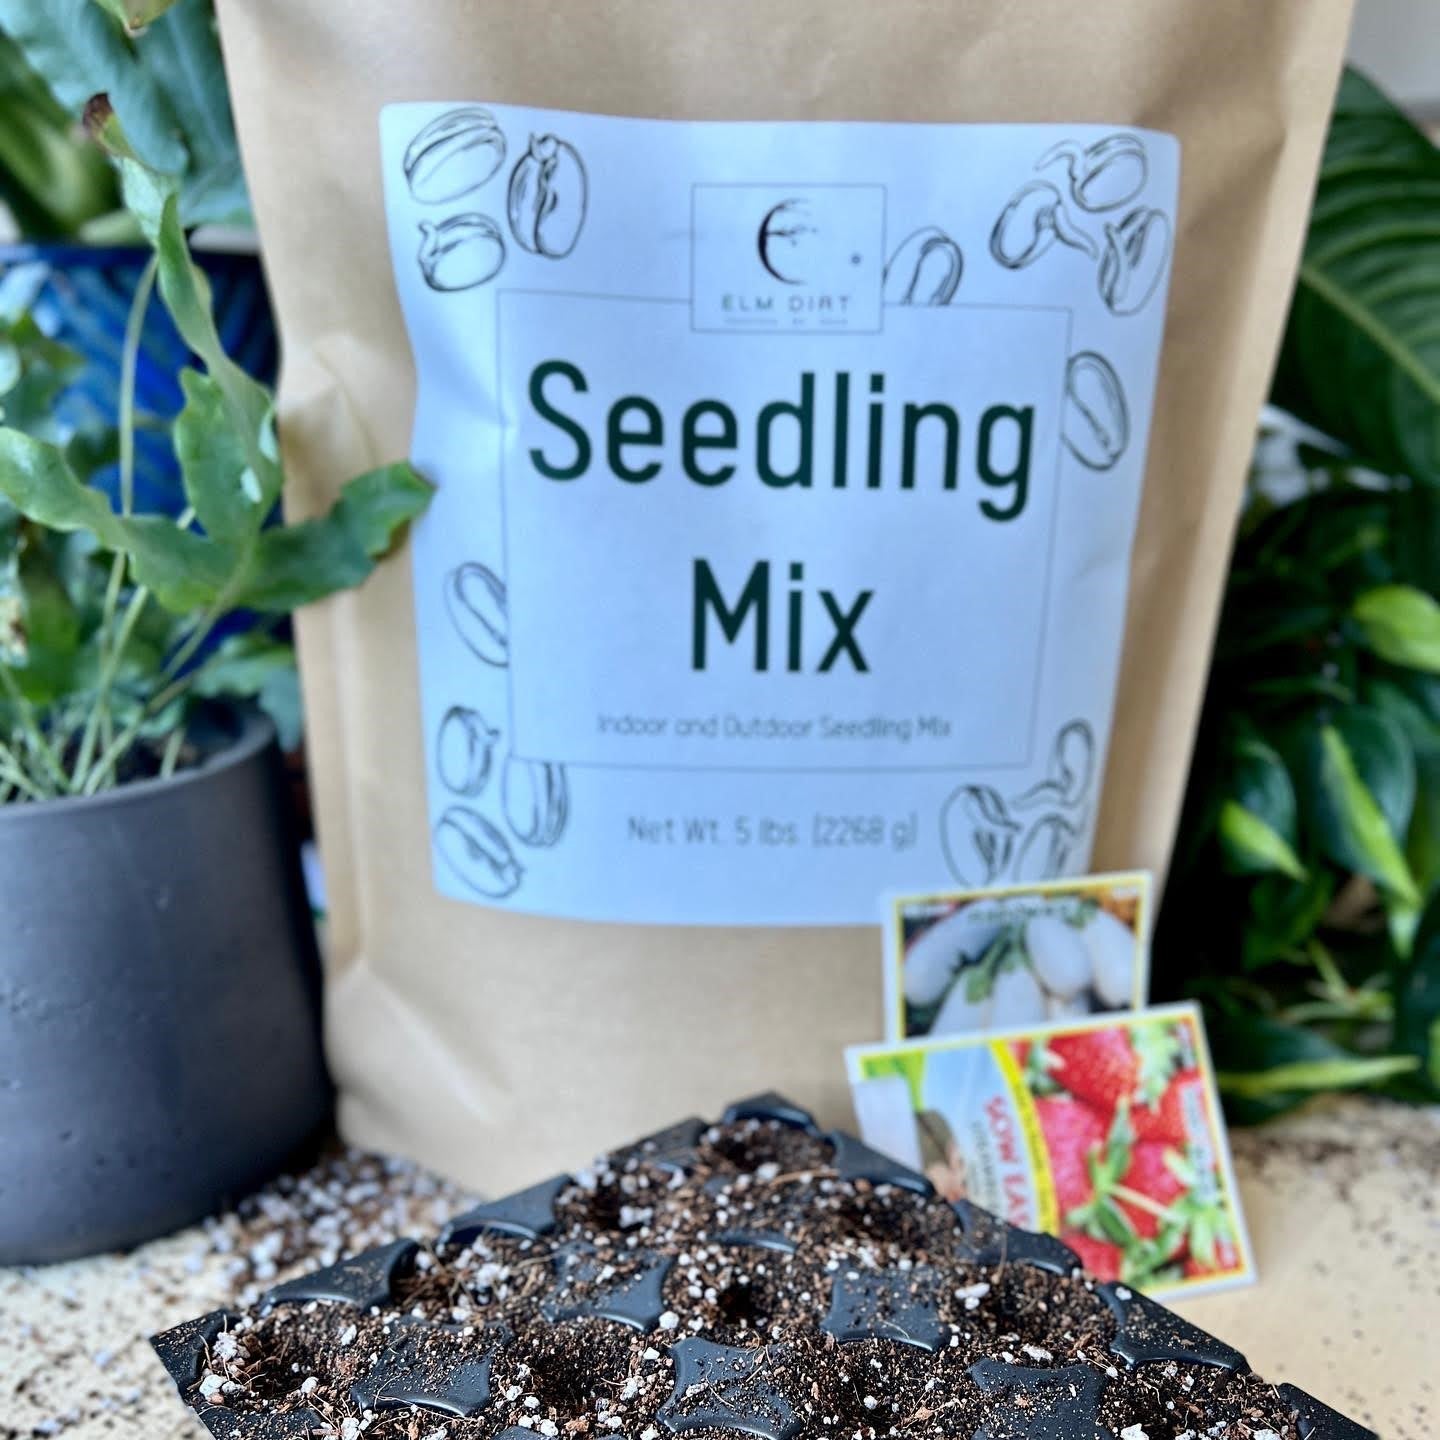 Elm Dirt Seedling Mix - Organic, airy mix for strong roots & healthy germination. Nurture seeds into thriving plants! Indoor & outdoor use. Shop now & grow your garden from the ground up!